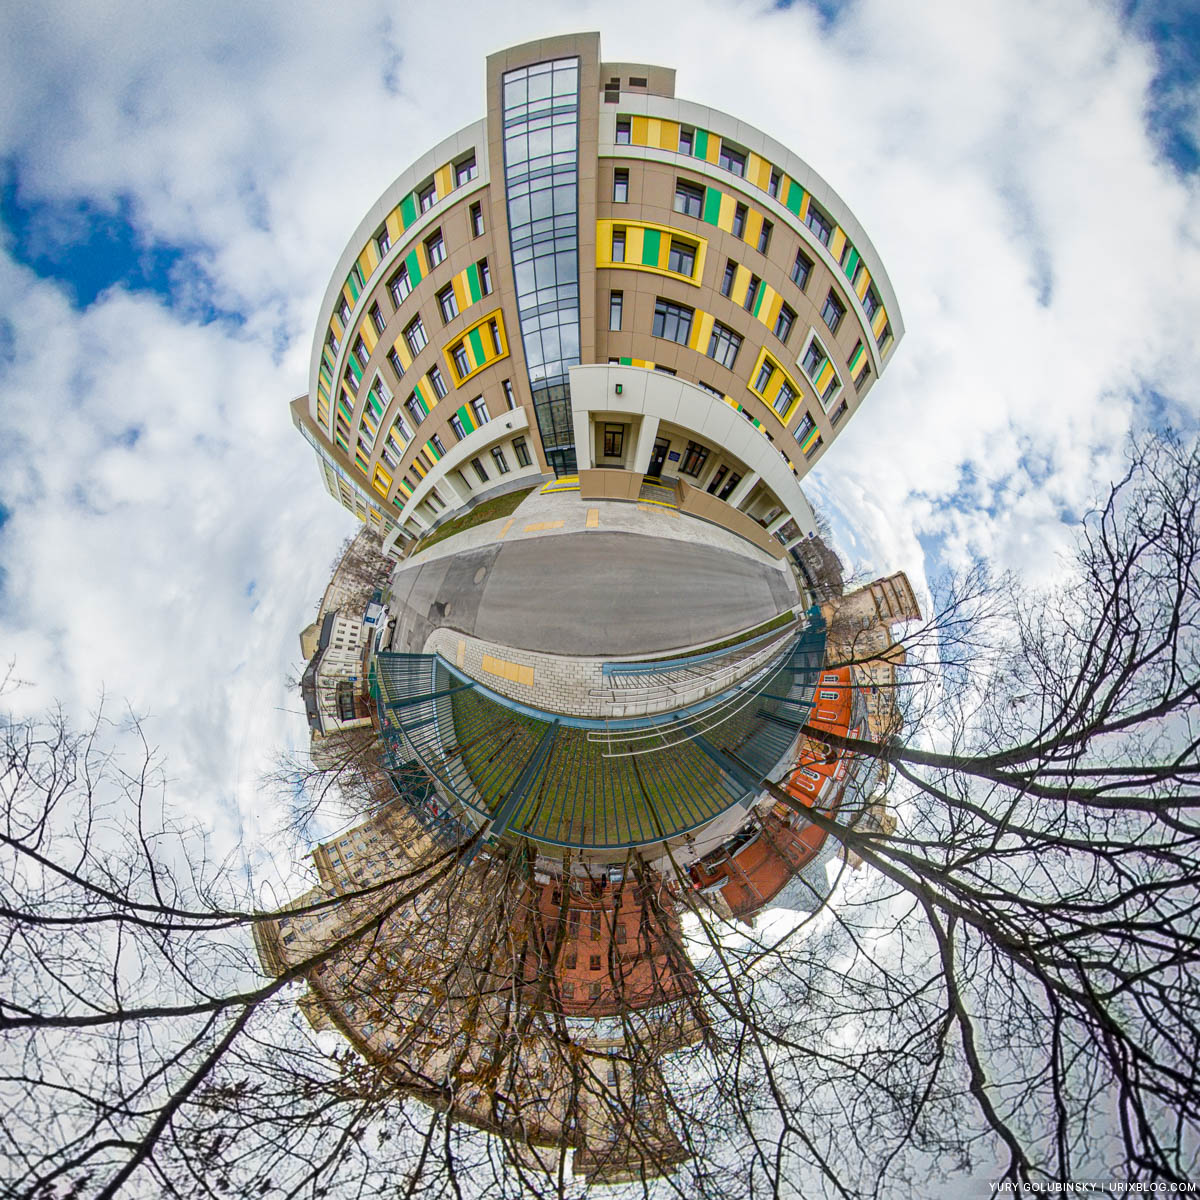 Church, polyclinic, hospital, littple planet, tiny planet, panorama, Moscow, Russia, 2020